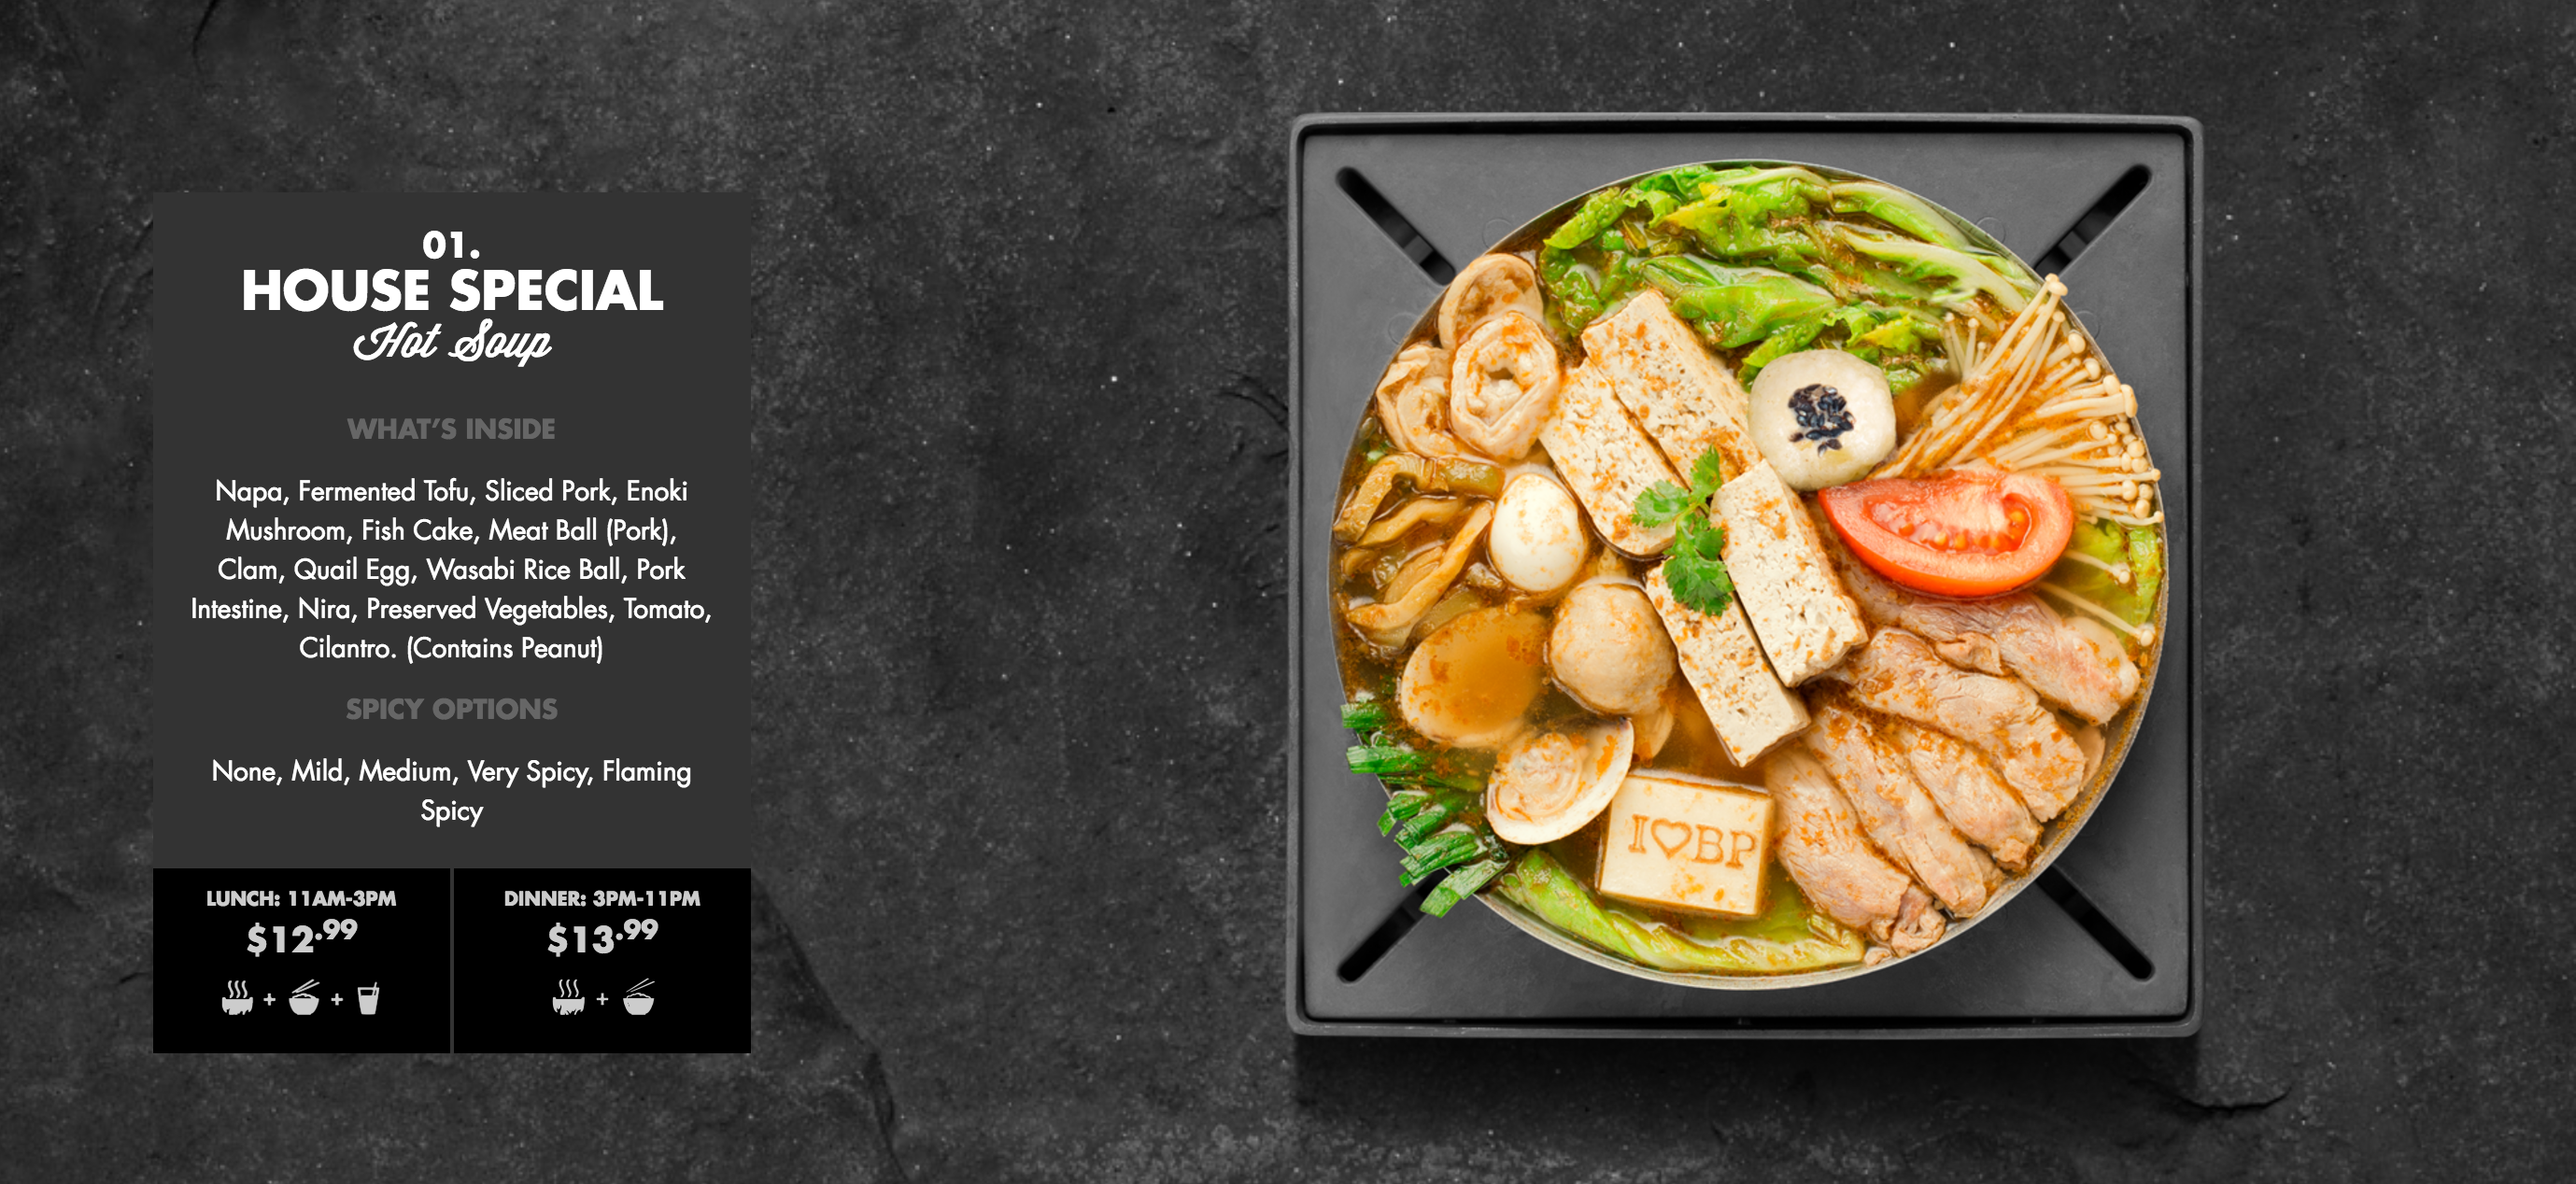 Boiling Point is Opening in Tukwila near Southcenter Mall